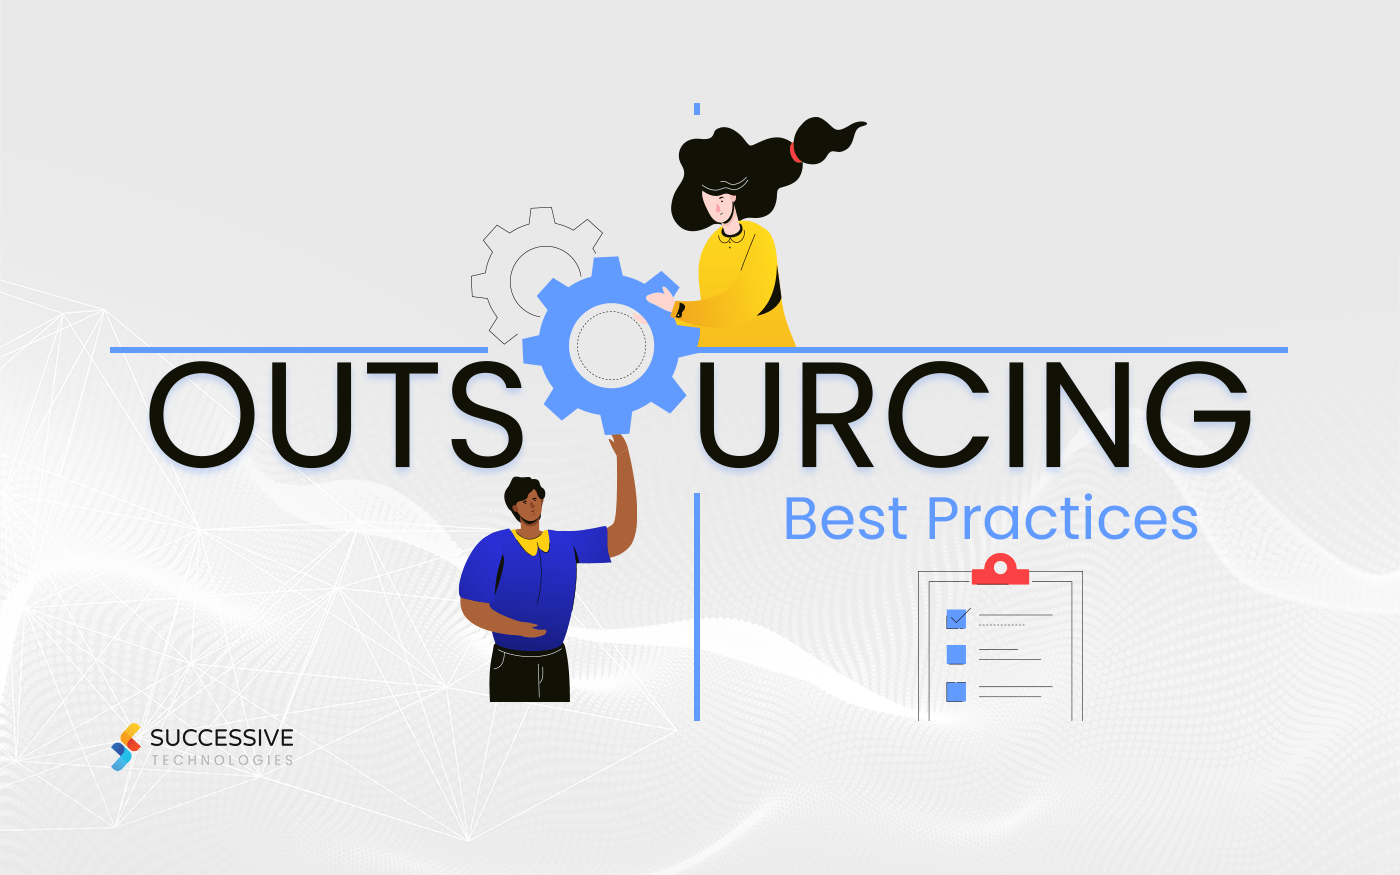 Out-for-sure-cing! Outsource to Save Time & Resources